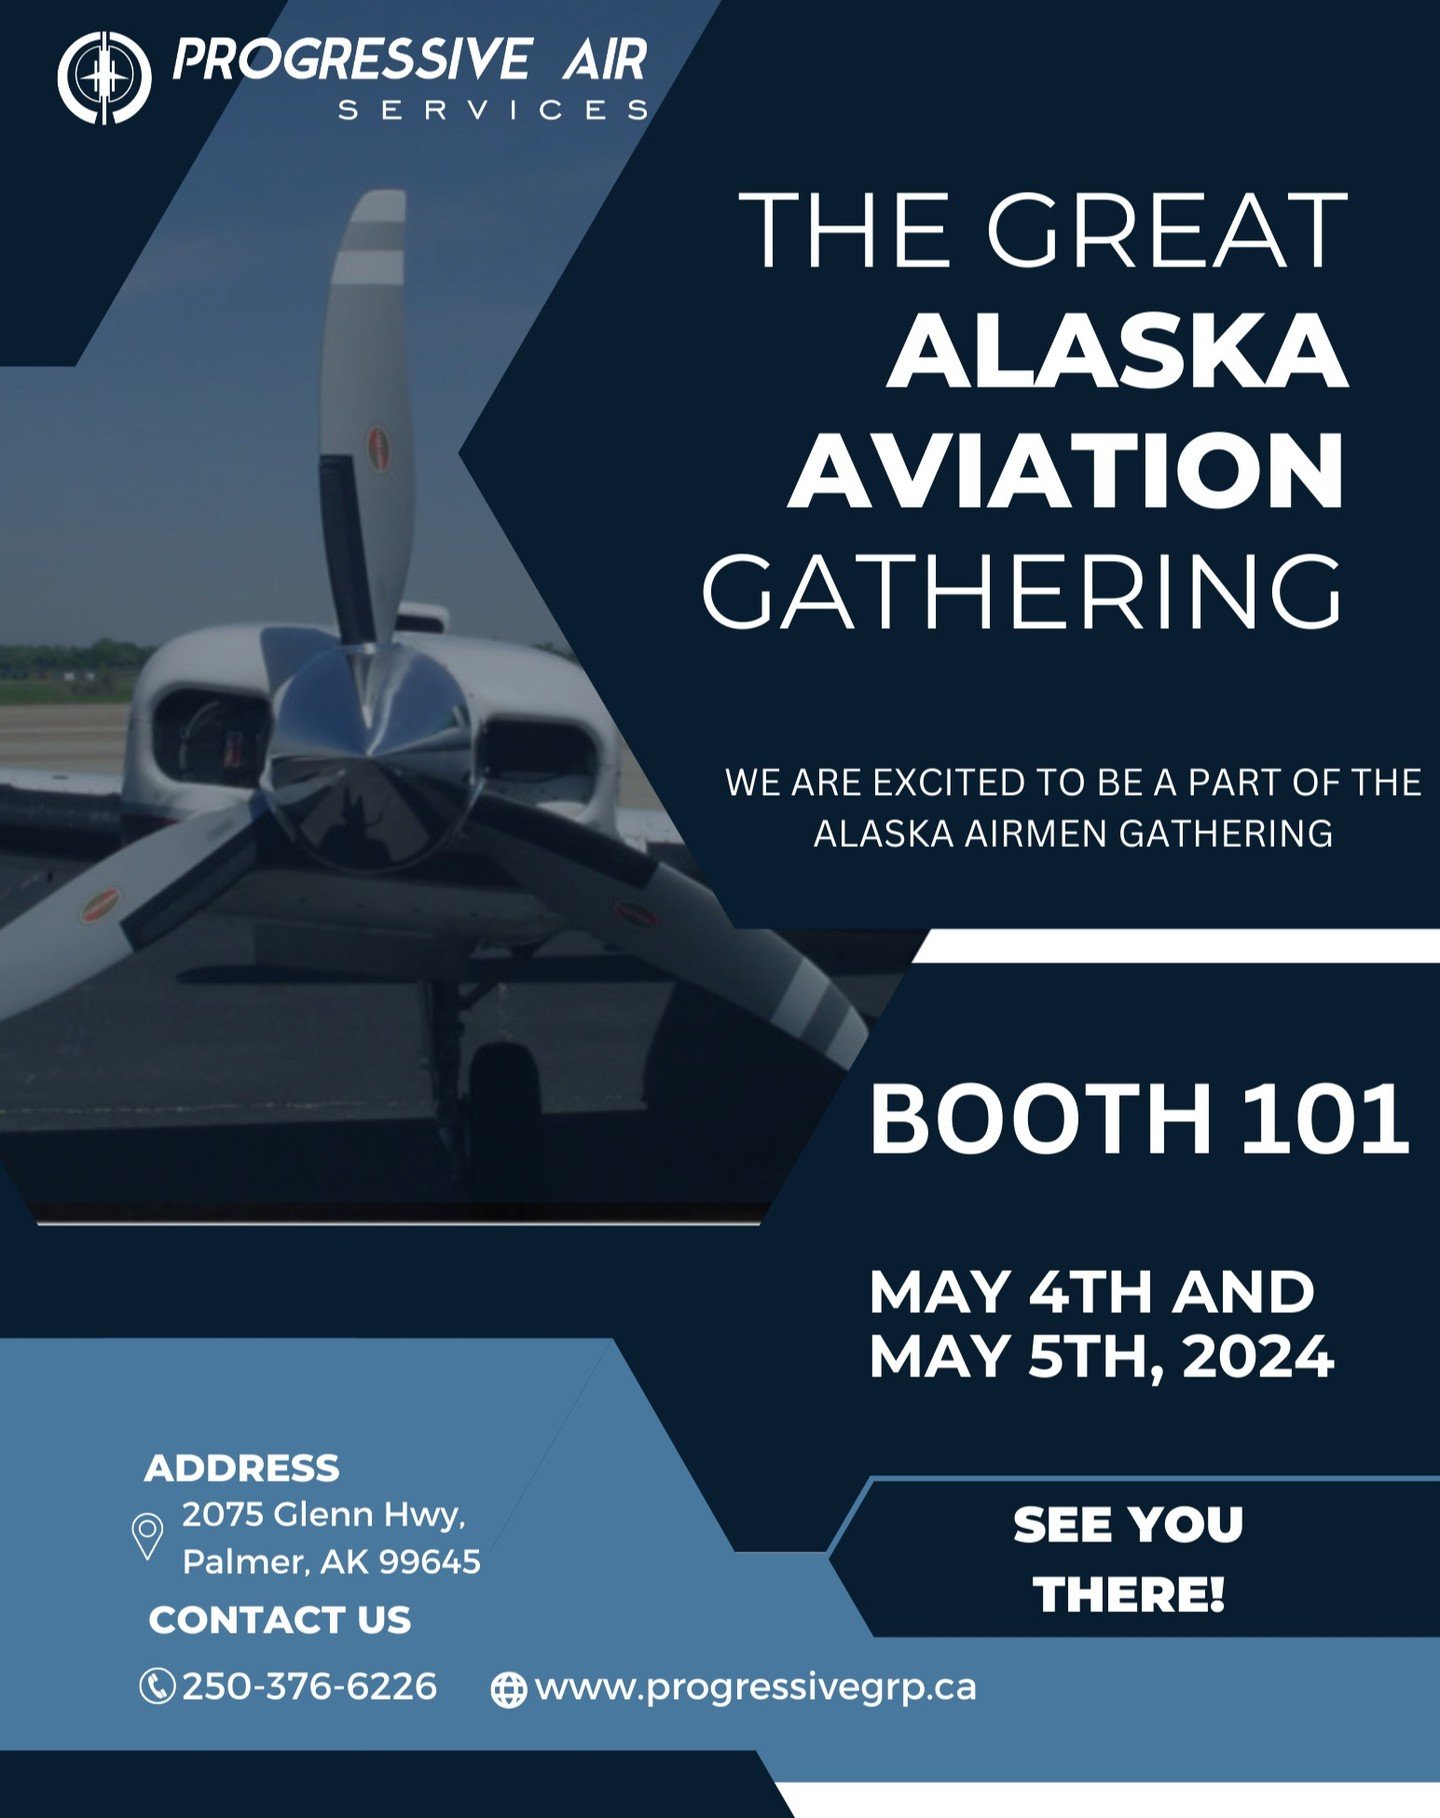 We are excited to be a part of the Alaska Airmen Gathering at the Palmer Municipal Airport on May 4th and 5th. 💯 🔥 
Come and see us at BOOTH 101.
Hope to see you there!